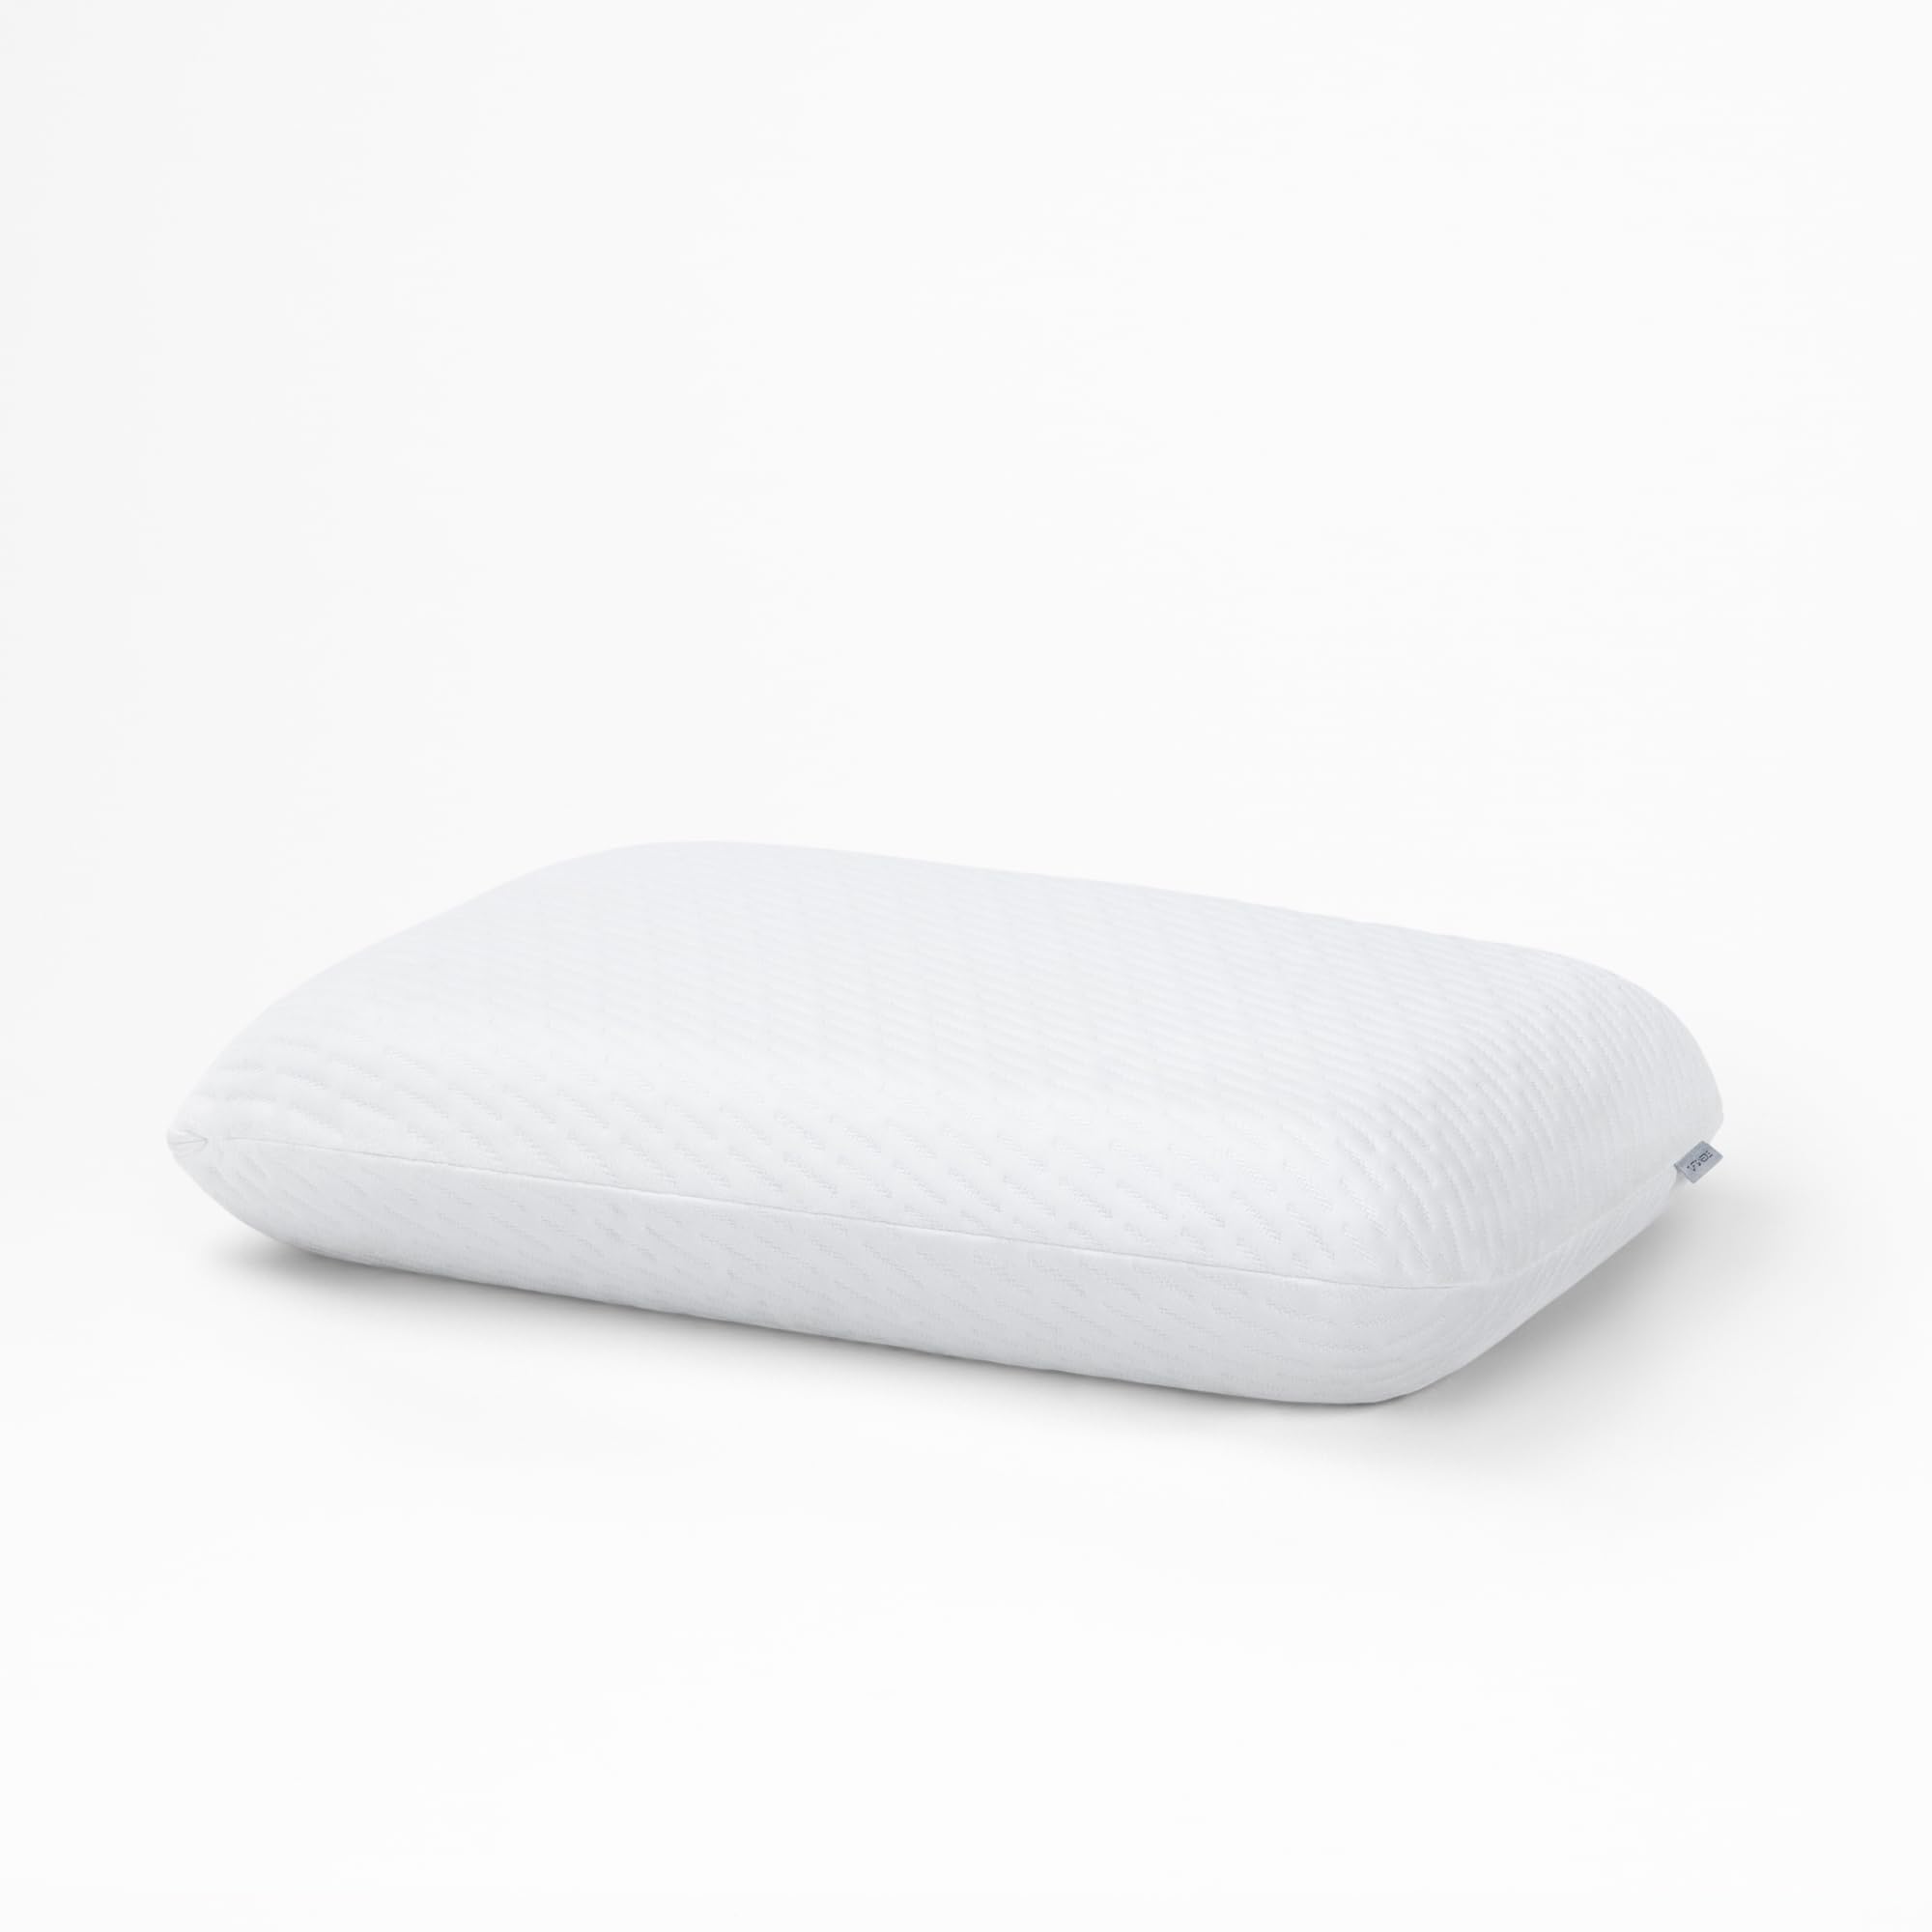 Tuft & Needle Premium Pillow, Standard Size with T&N Adaptive Foam, Sleeps Cooler & More Supportive Than Memory Foam Pillows, Ce